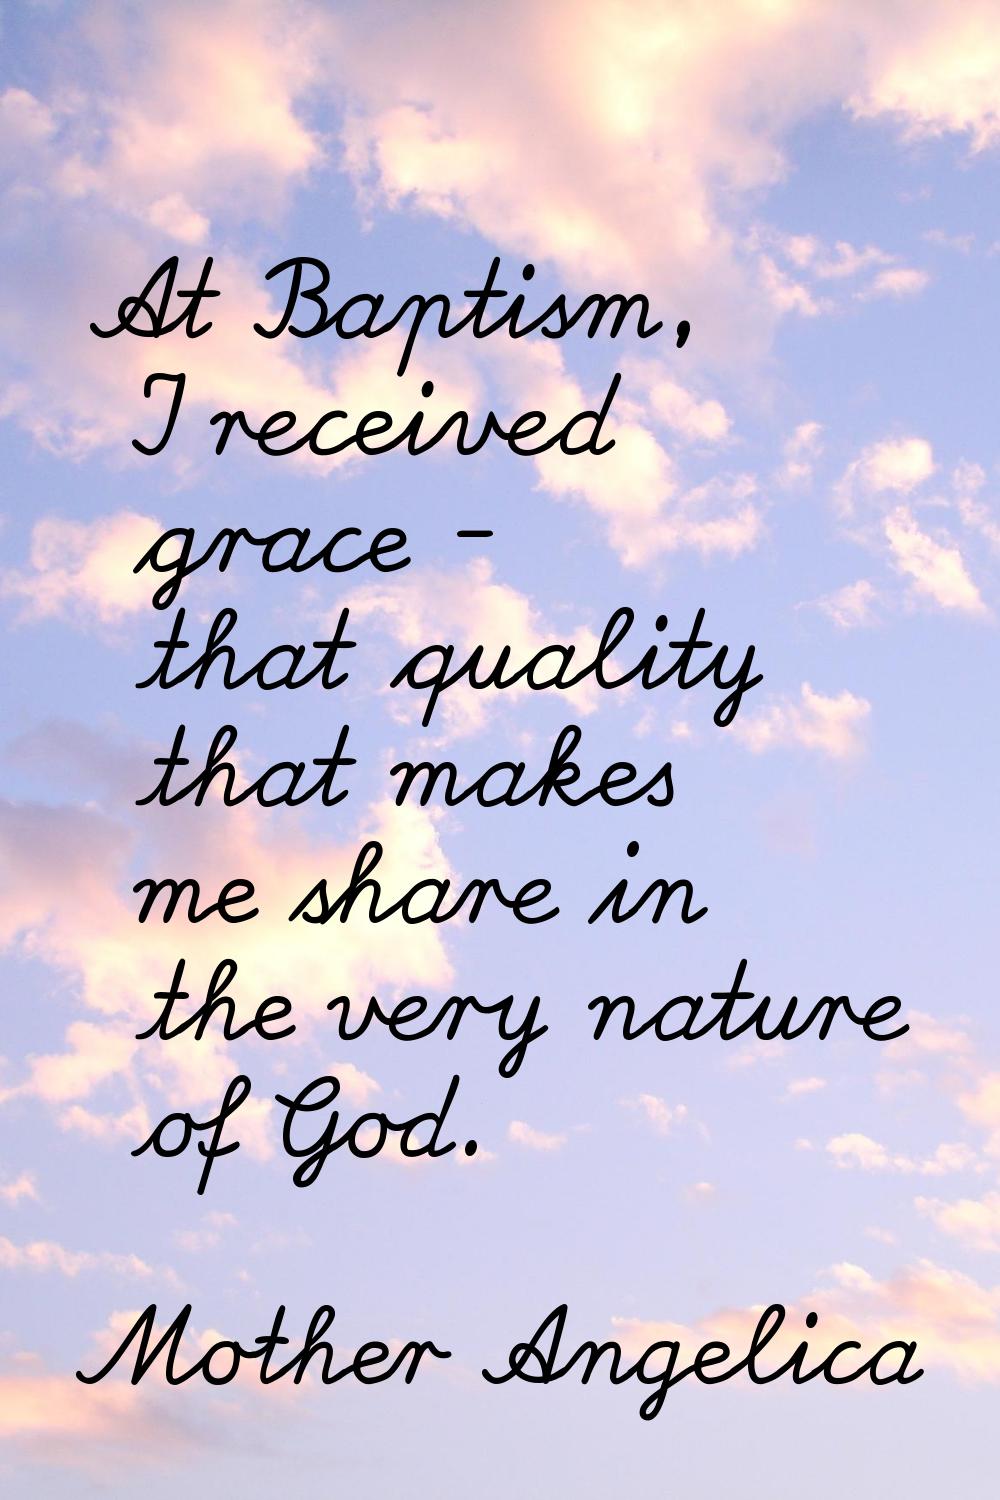 At Baptism, I received grace - that quality that makes me share in the very nature of God.